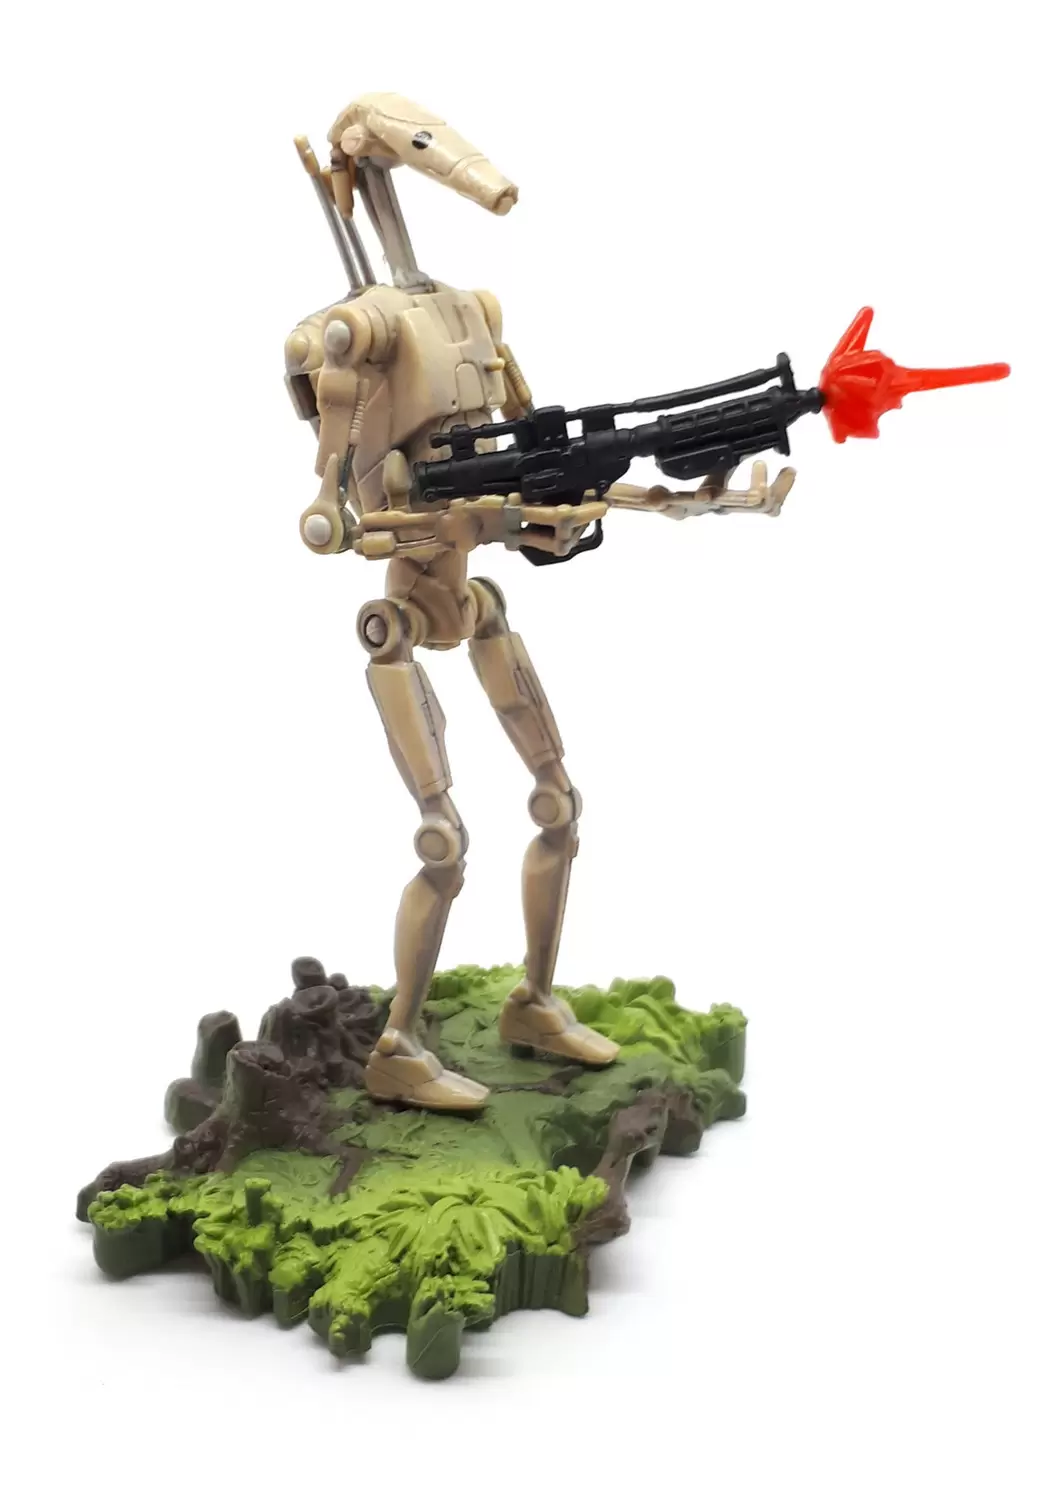 Battle Droid Star Wars Revenge Of The Sith Collection 2005